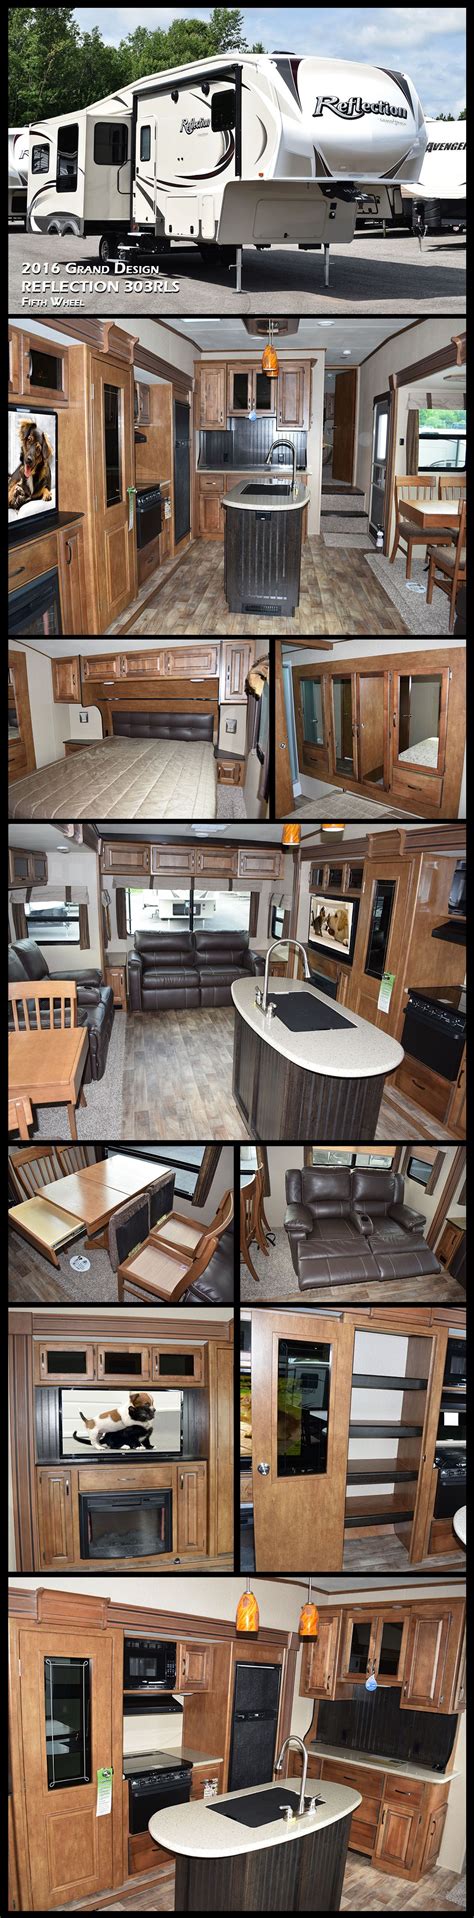 This Grand Design Reflection 303rls Mid Sized Fifth Wheel Is The